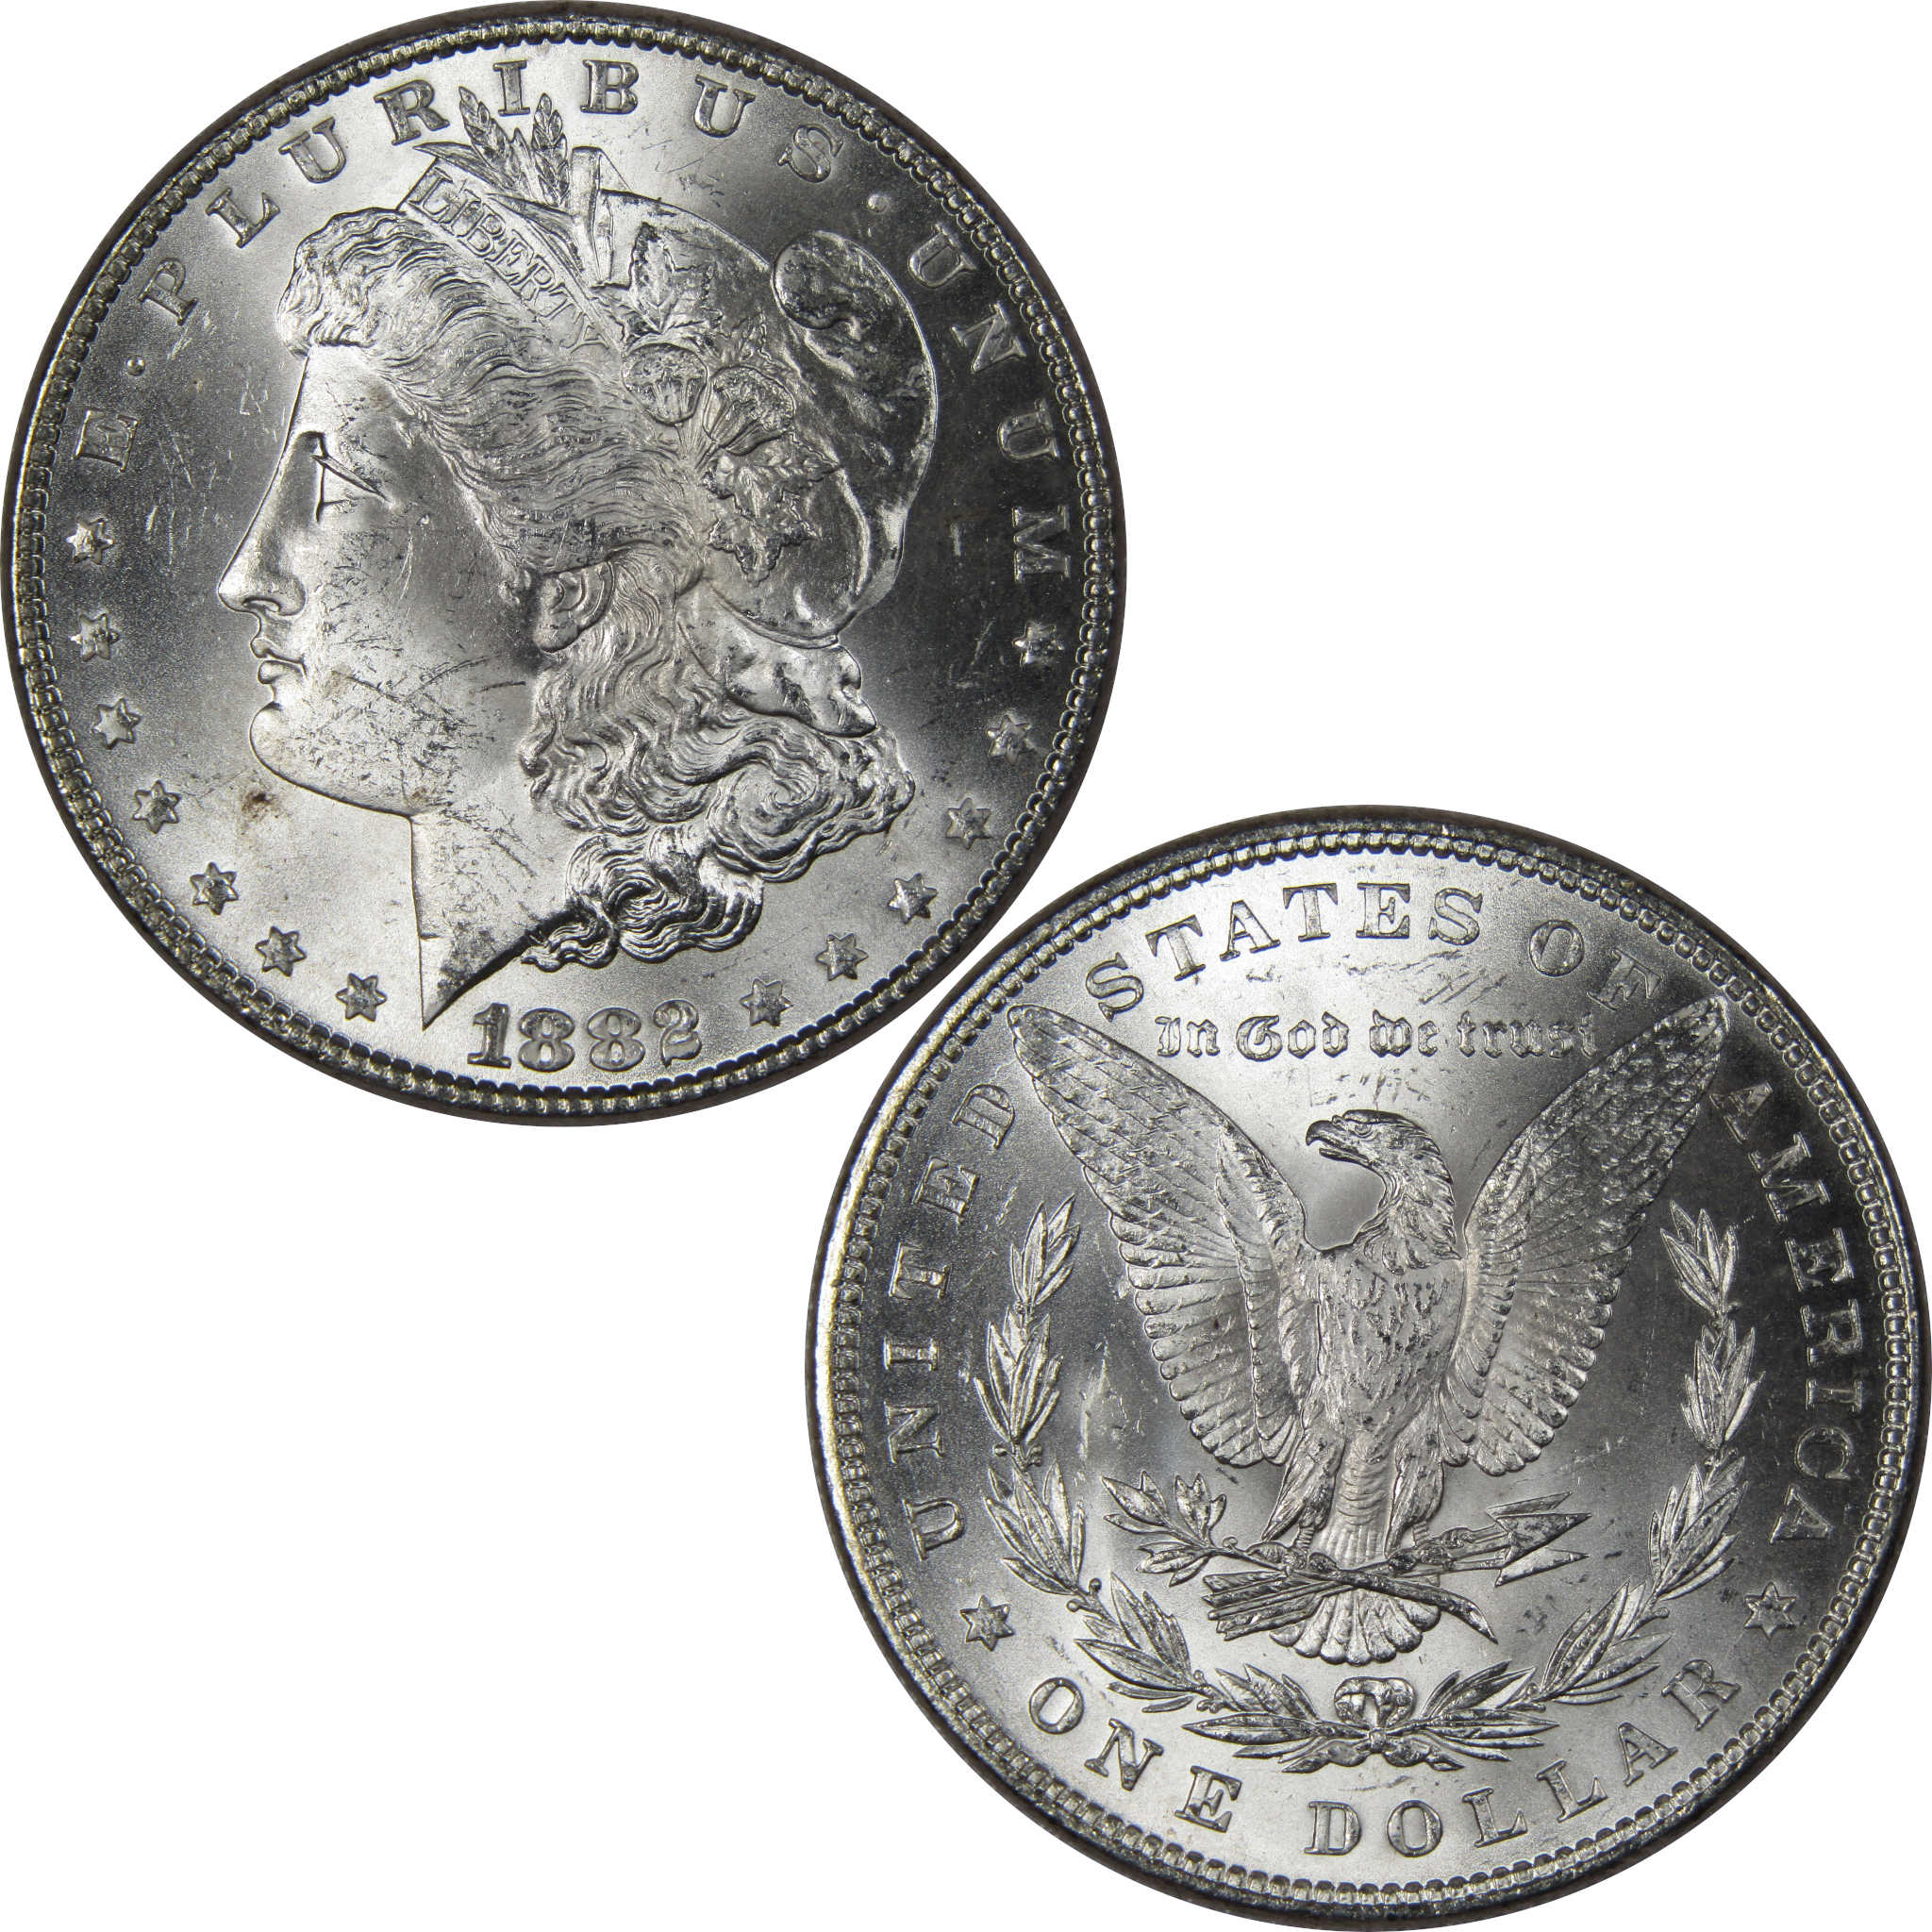 1882 Morgan Dollar BU Uncirculated Mint State 90% Silver SKU:IPC9698 - Morgan coin - Morgan silver dollar - Morgan silver dollar for sale - Profile Coins &amp; Collectibles